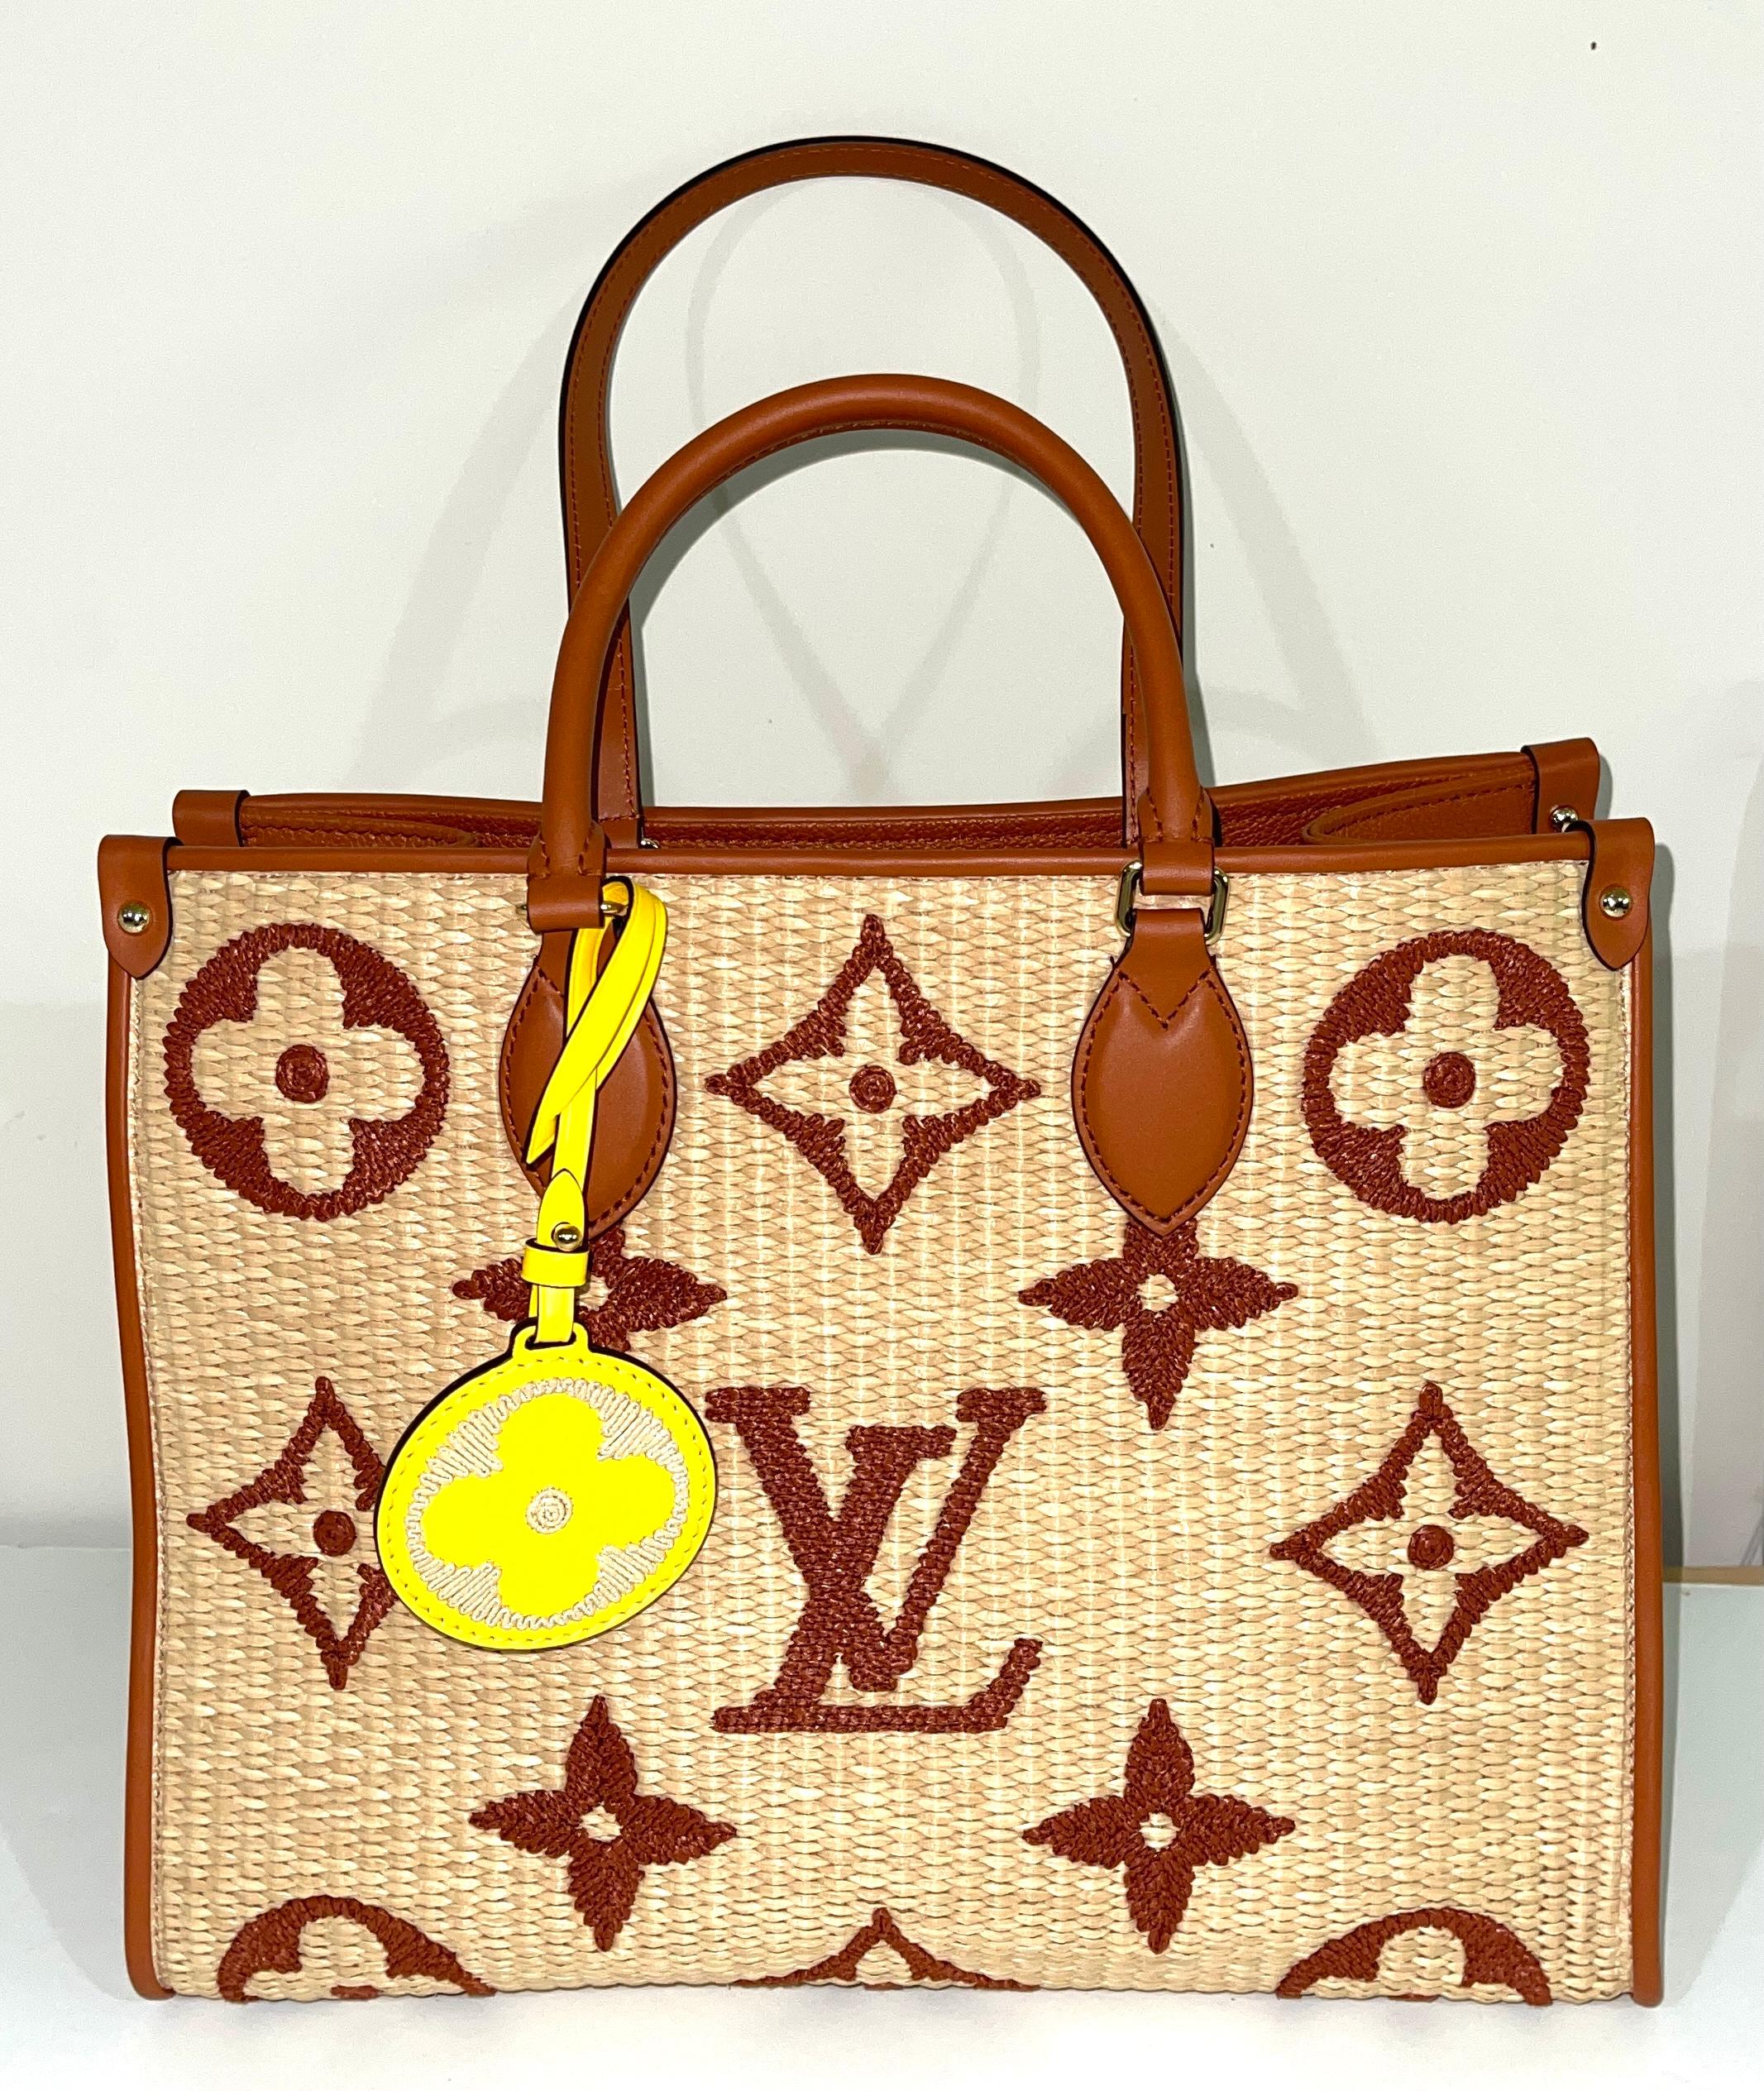 Louis Vuitton 
Onthego Tote
Raffia and Leather
Sold out
From the By the pool collection
Ladies this is the absolute best size !
Genius!
Opens so easy to get things quickly
Lightweight
Use as tote or shoulder
Louis Vuitton 
Onthego Tote
New Size